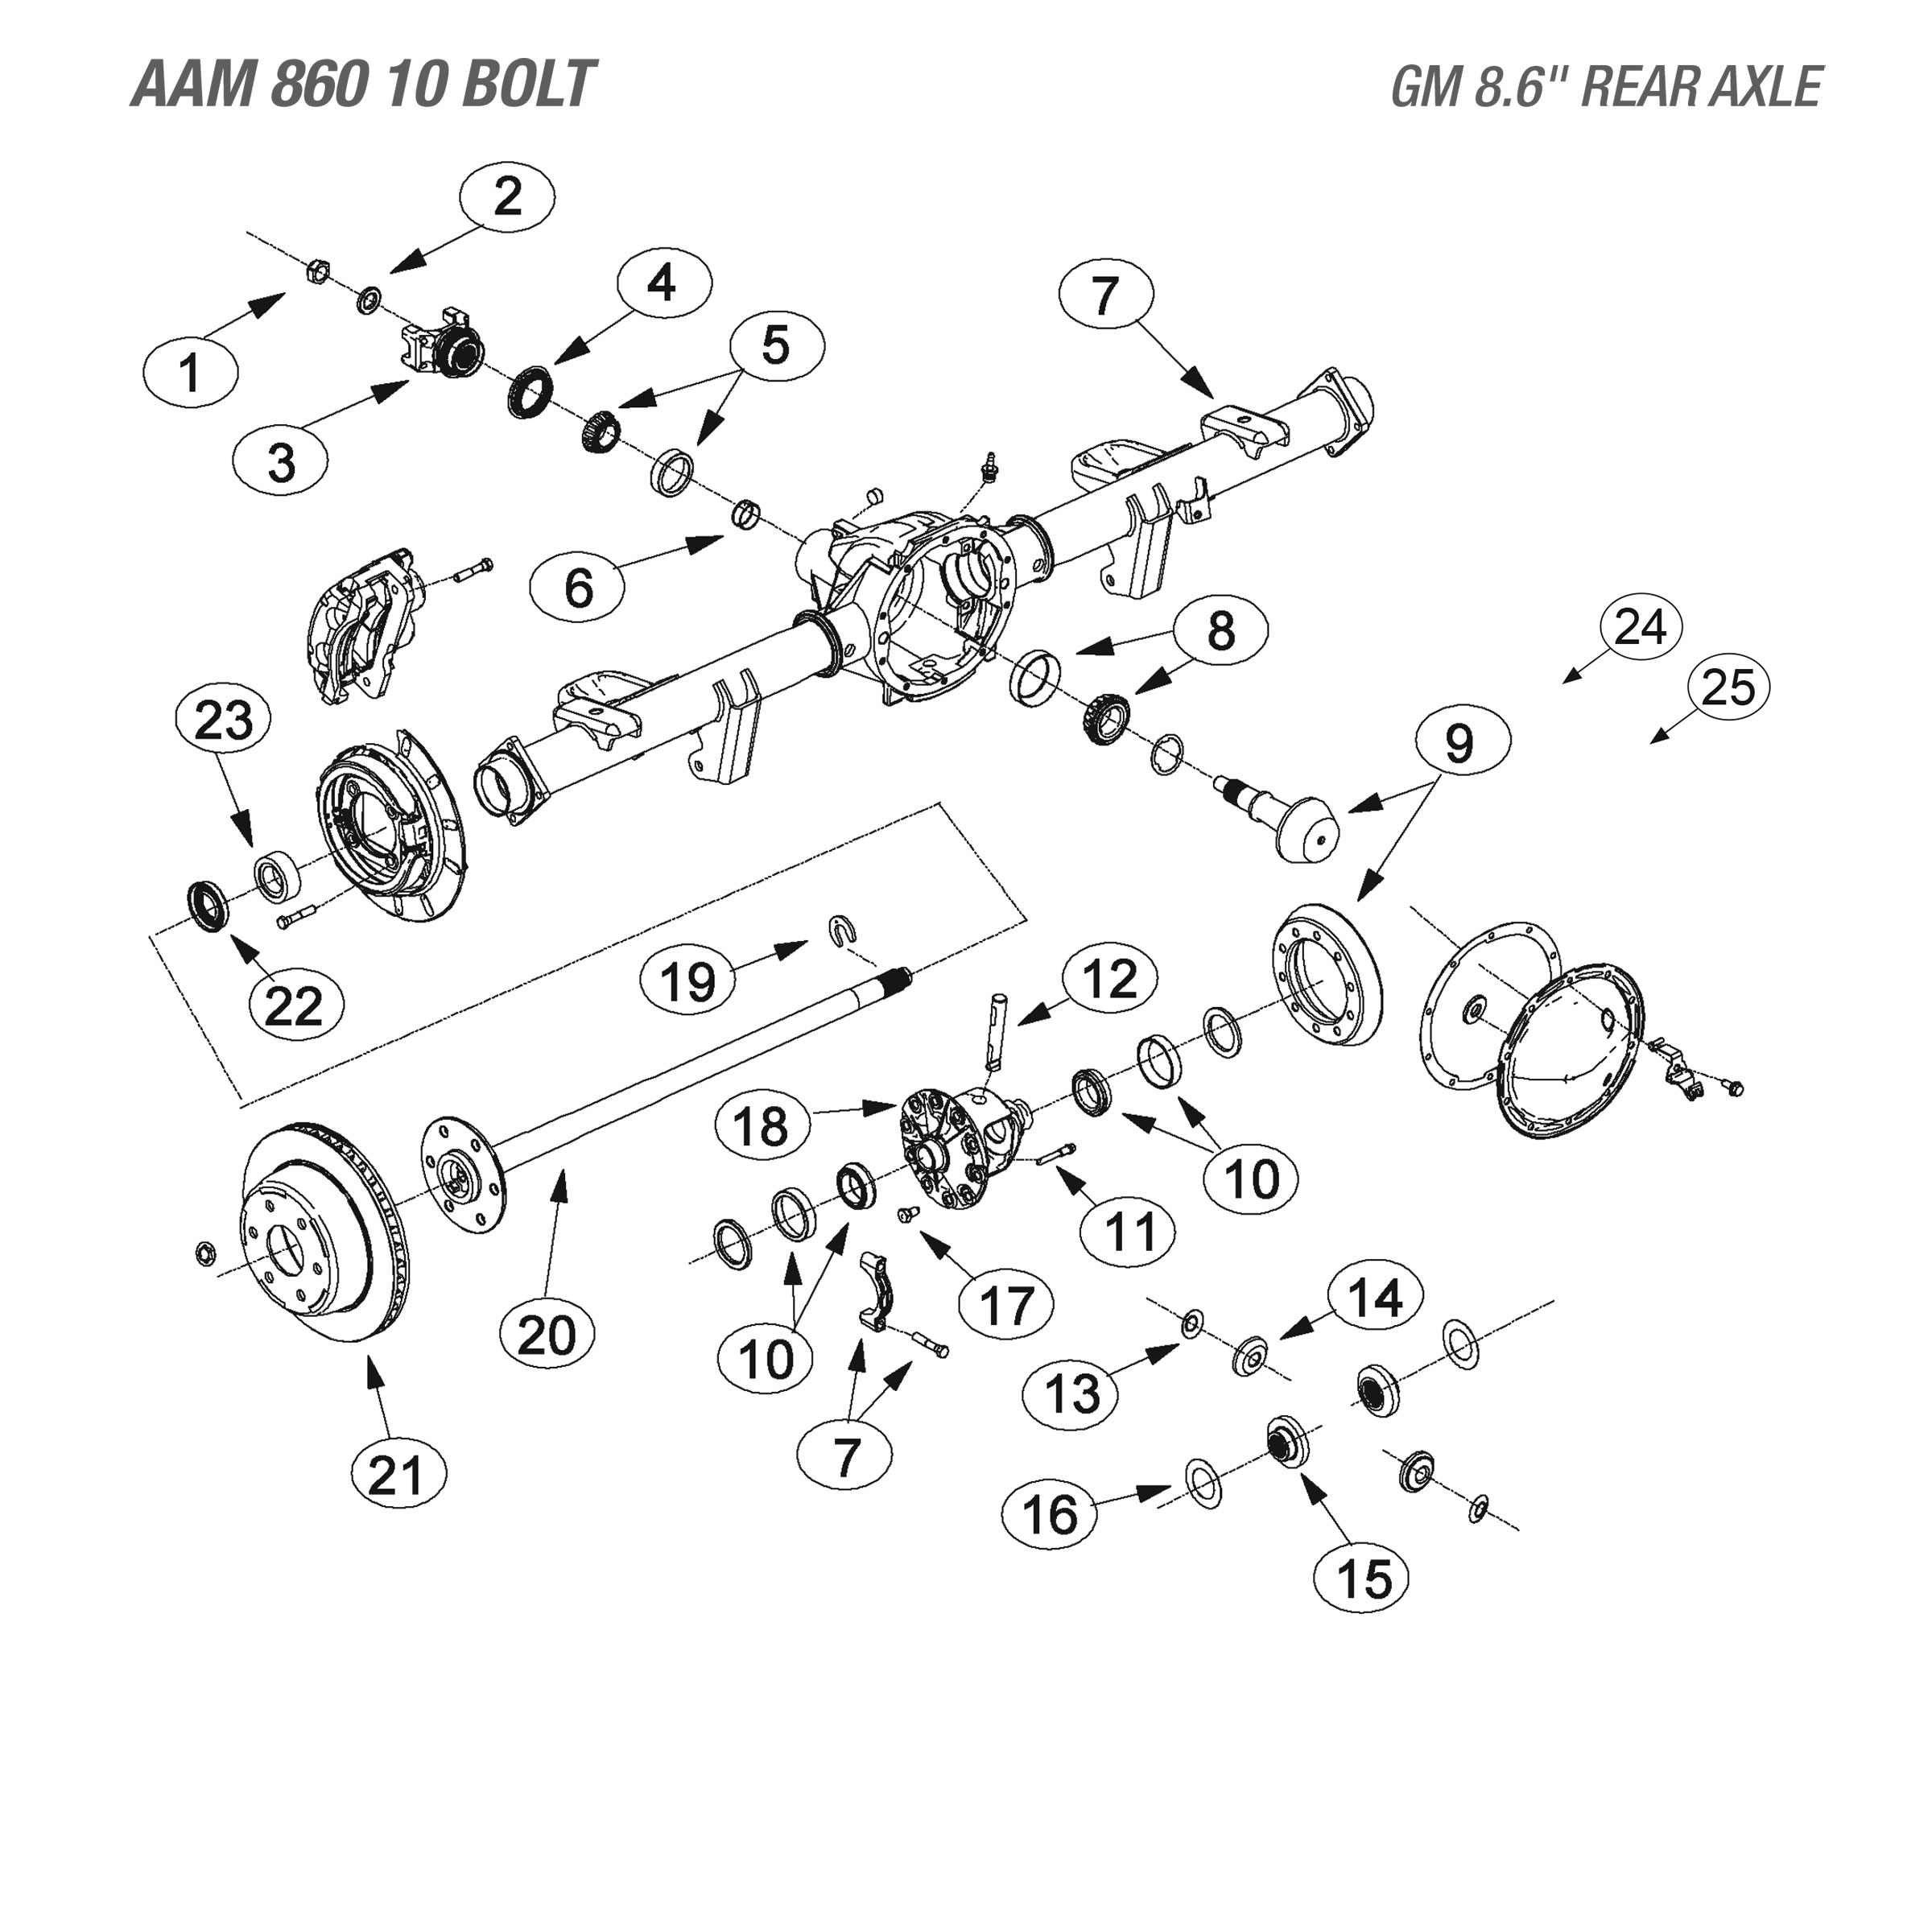 GM 8.6 Rear Axle - Exploded View